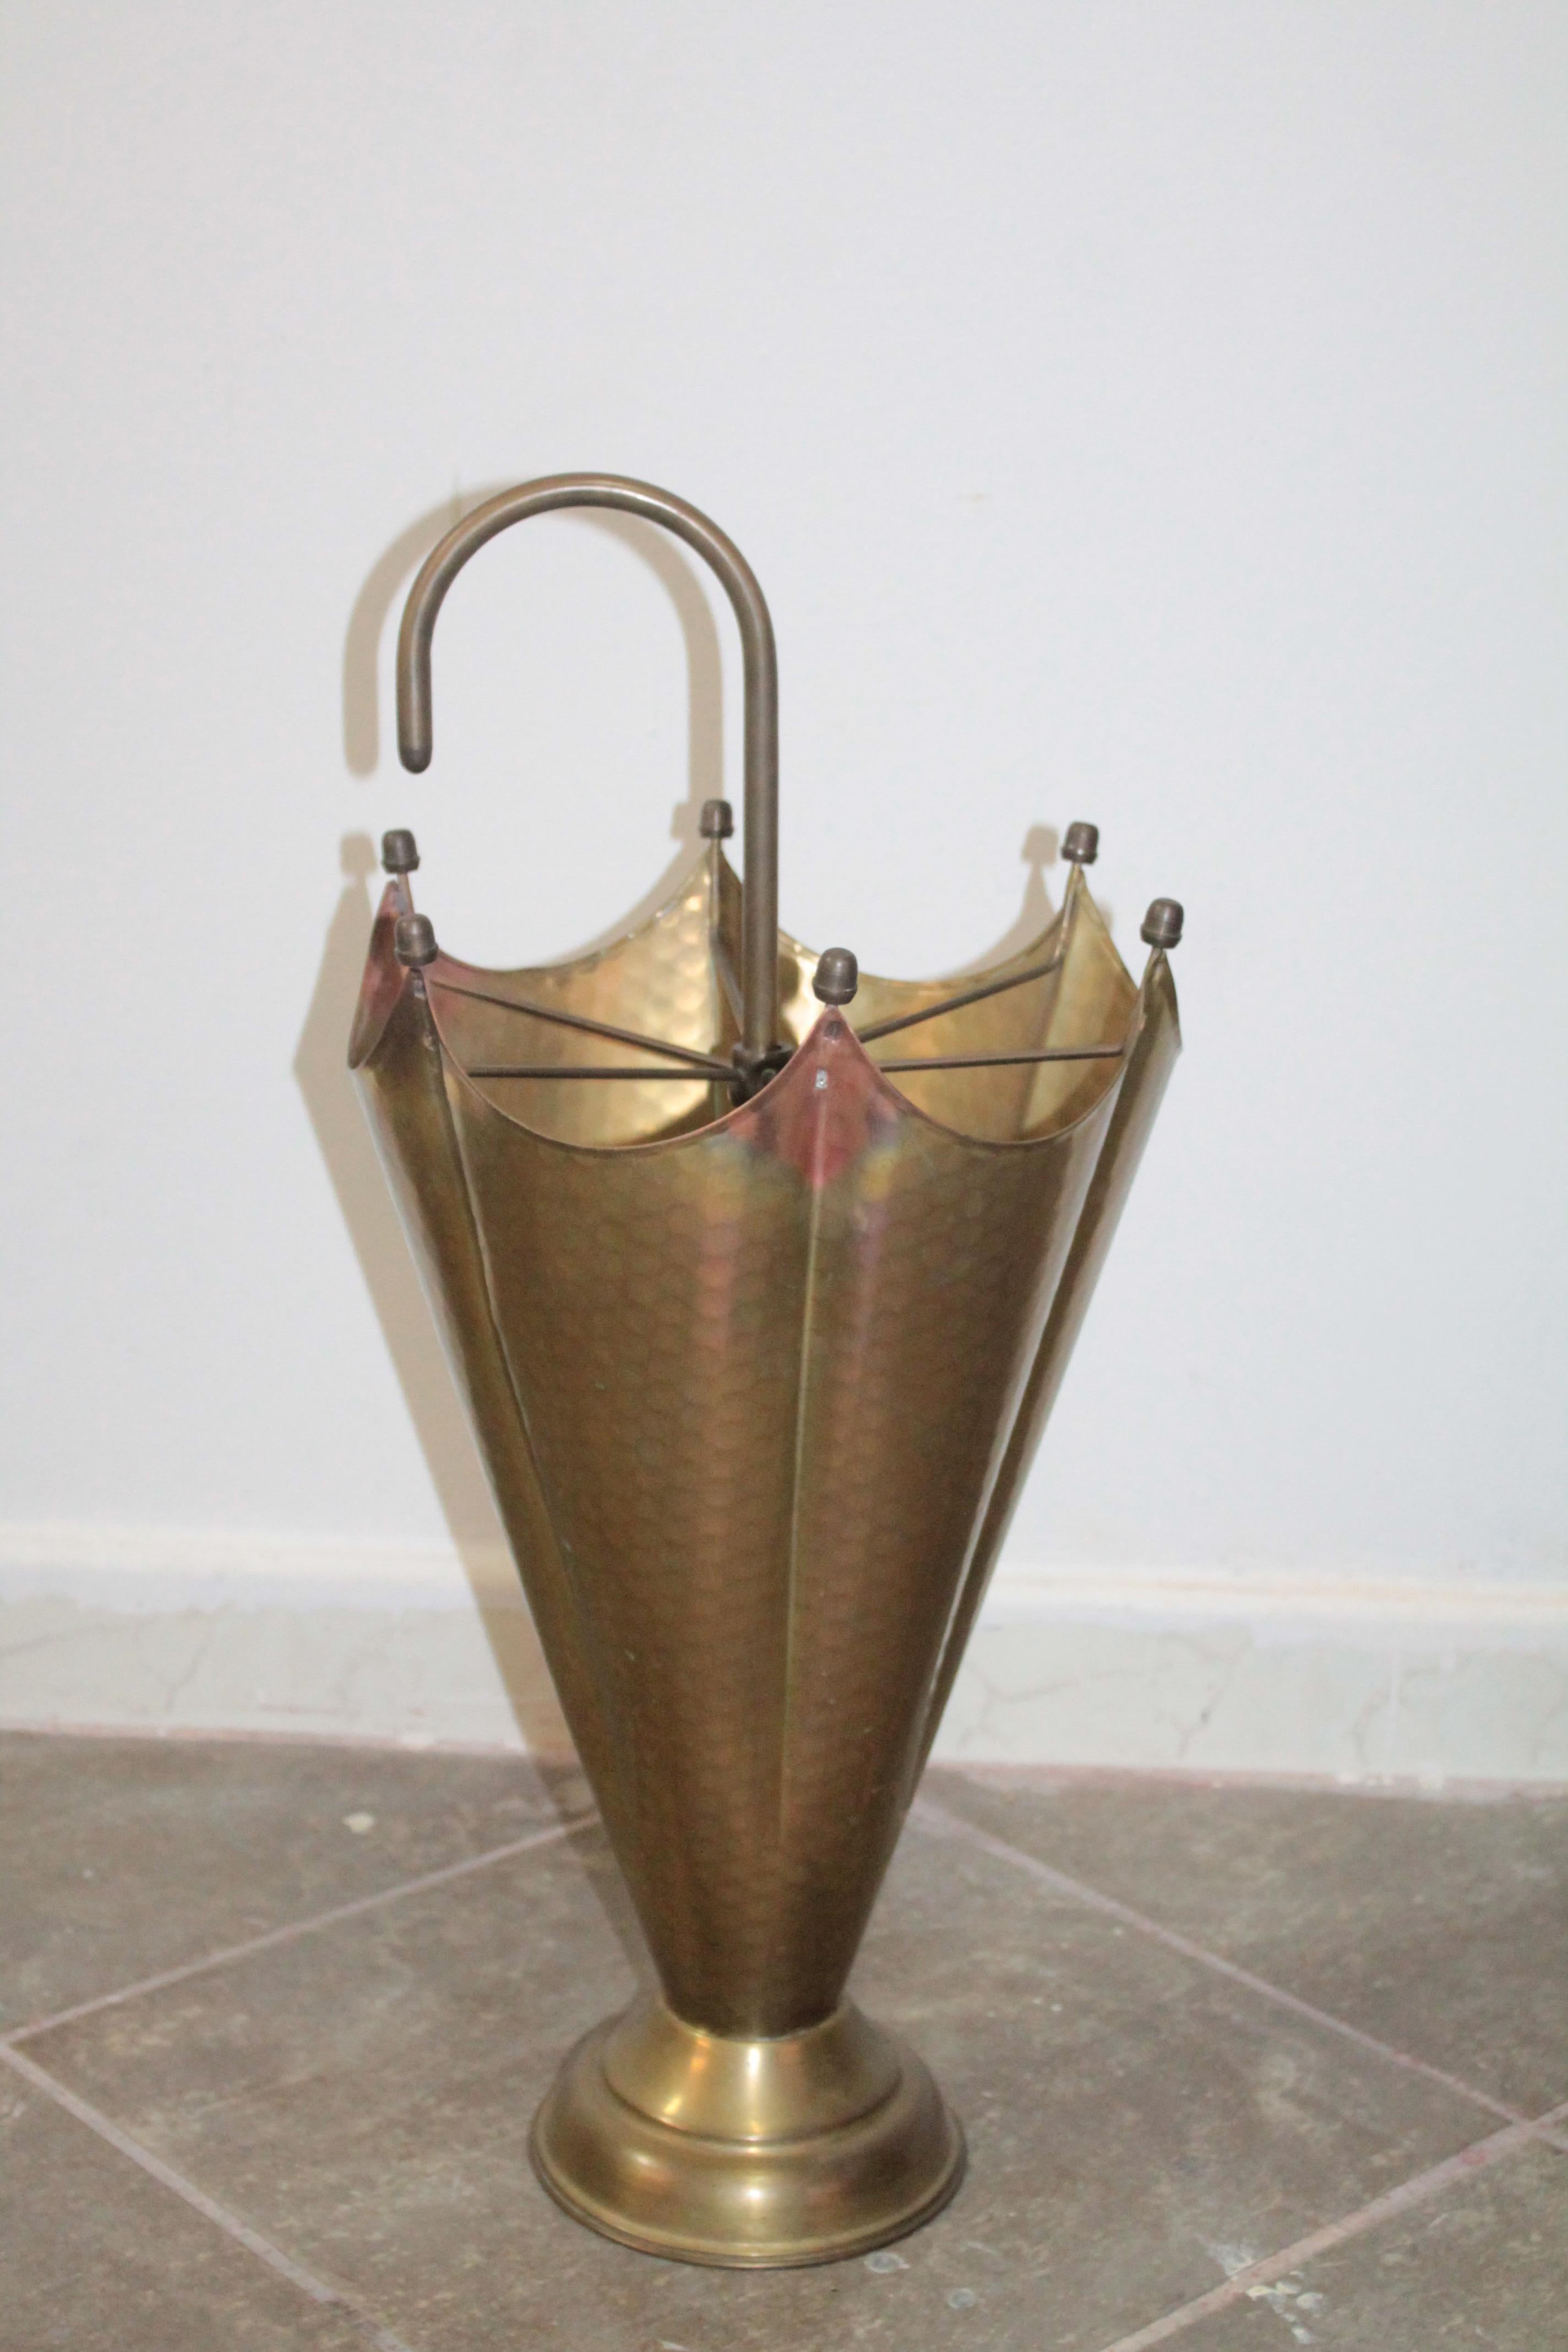 Brass umbrella stand, Italian Manufacturing circa 1950.
Signs of oxidation visible in the pictures.